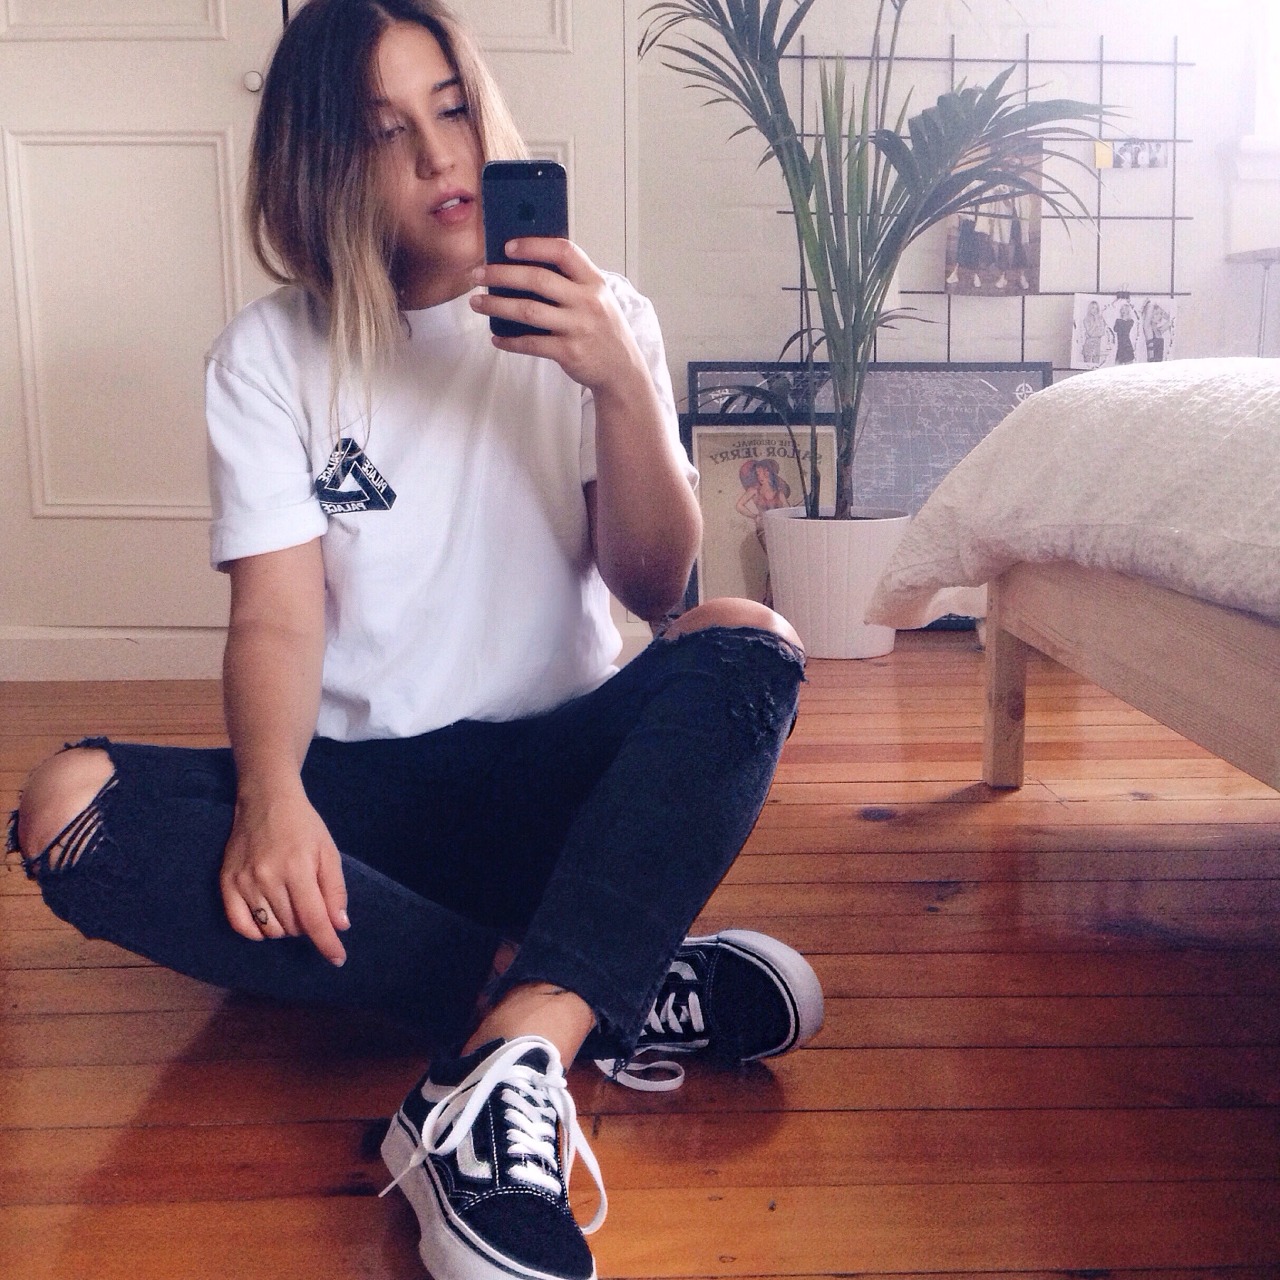 vans outfit girl